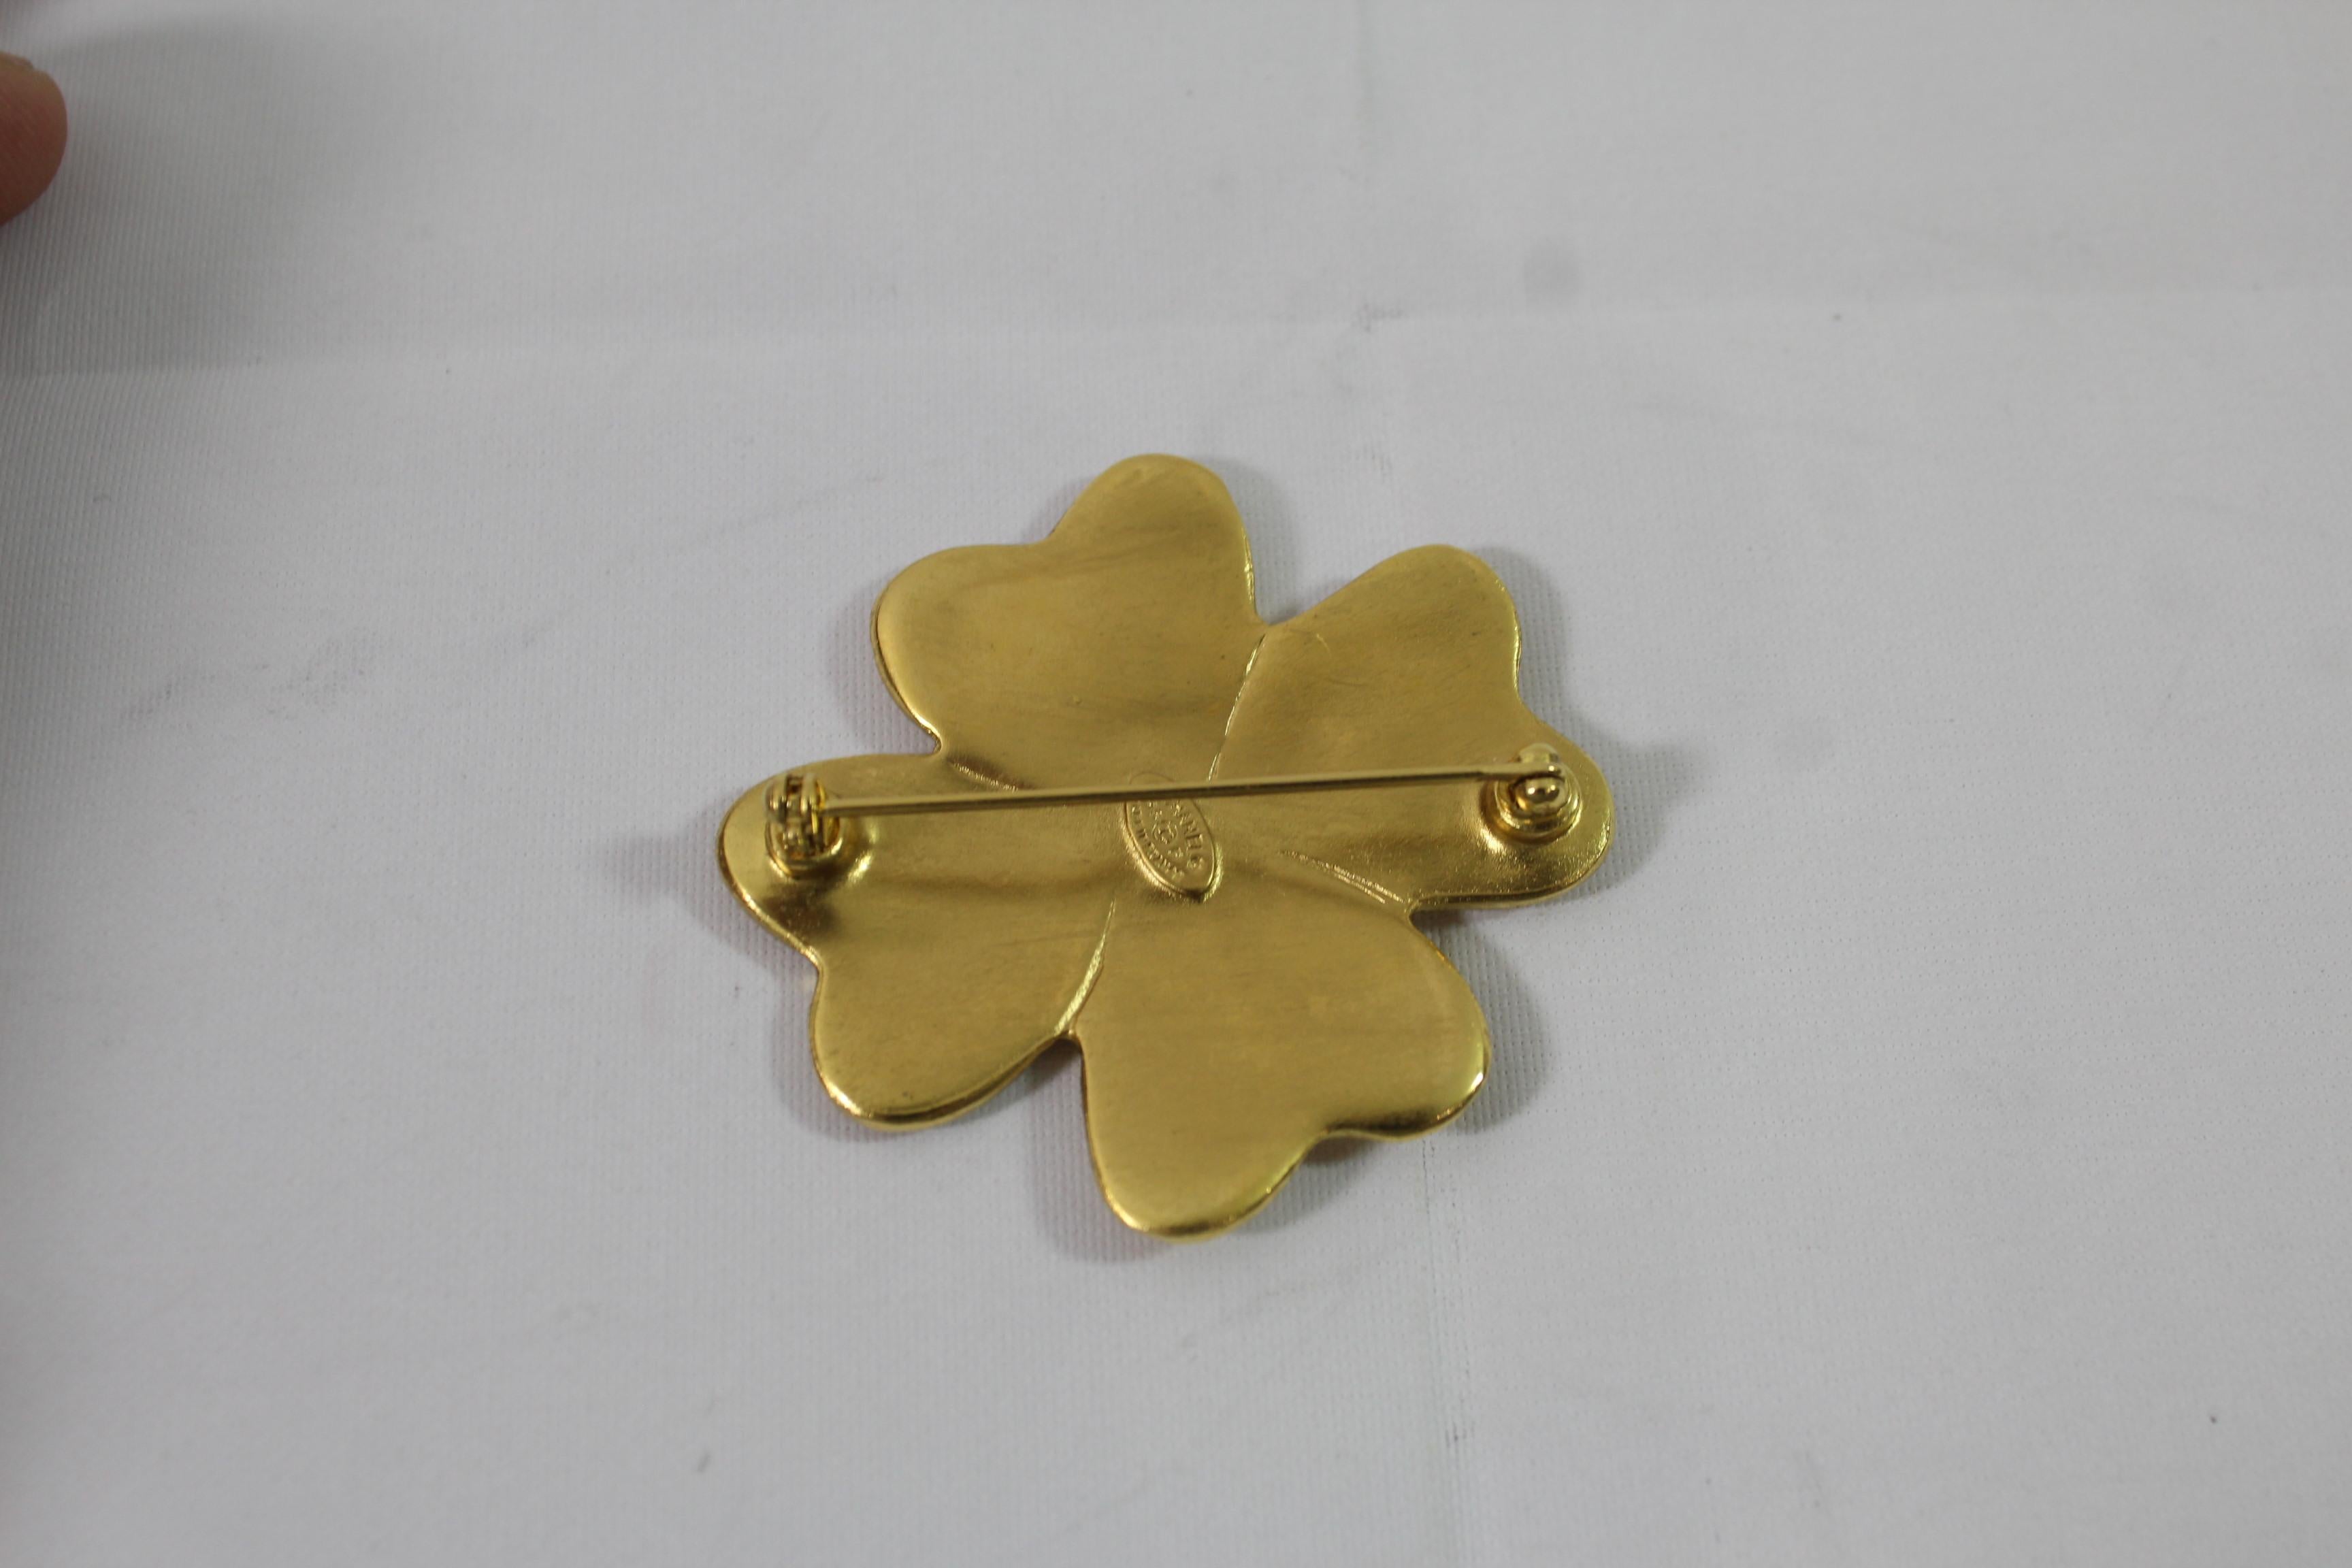 Nice Chanel brooch in golden metal. 
Collection spring 1995. 
Really good vintage condition. 
Size 4.5 cm